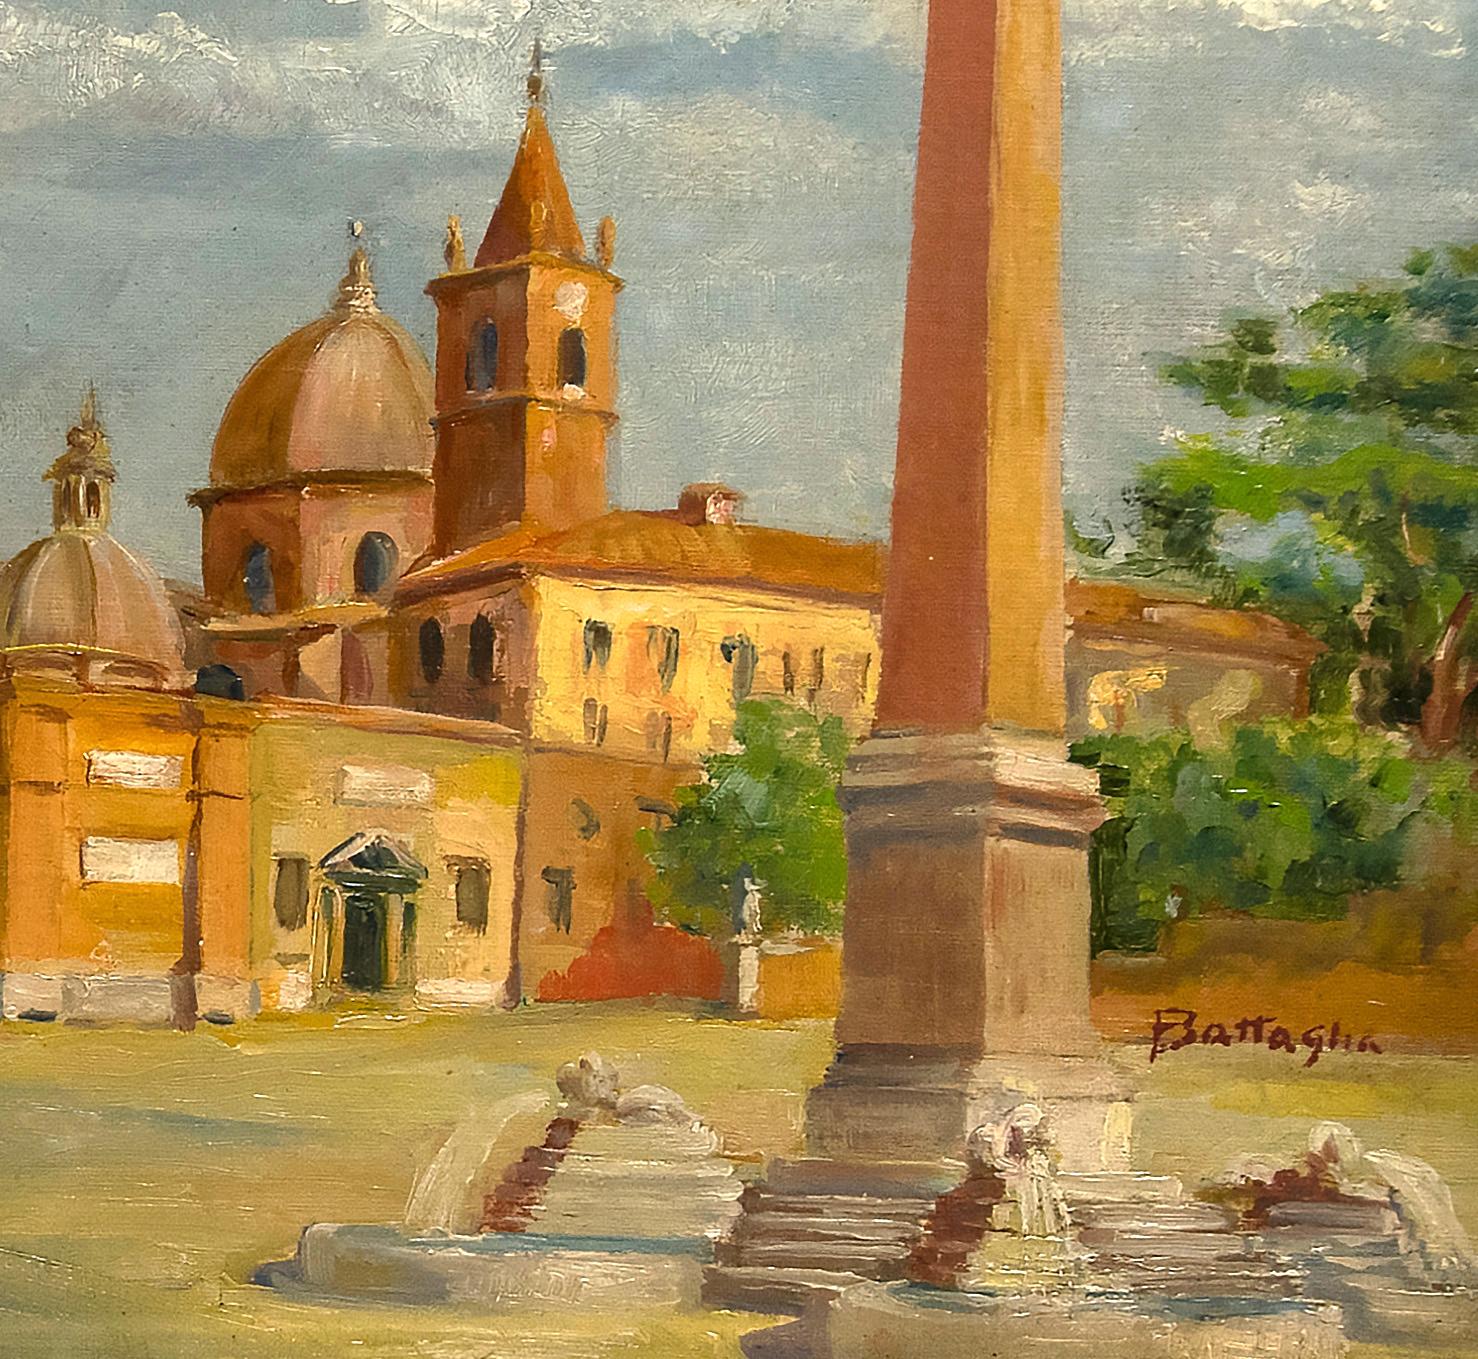 Piazza del Popolo, Rome - Oil on Cardboard - Early 20th Century  - Painting by Alessandro Battaglia